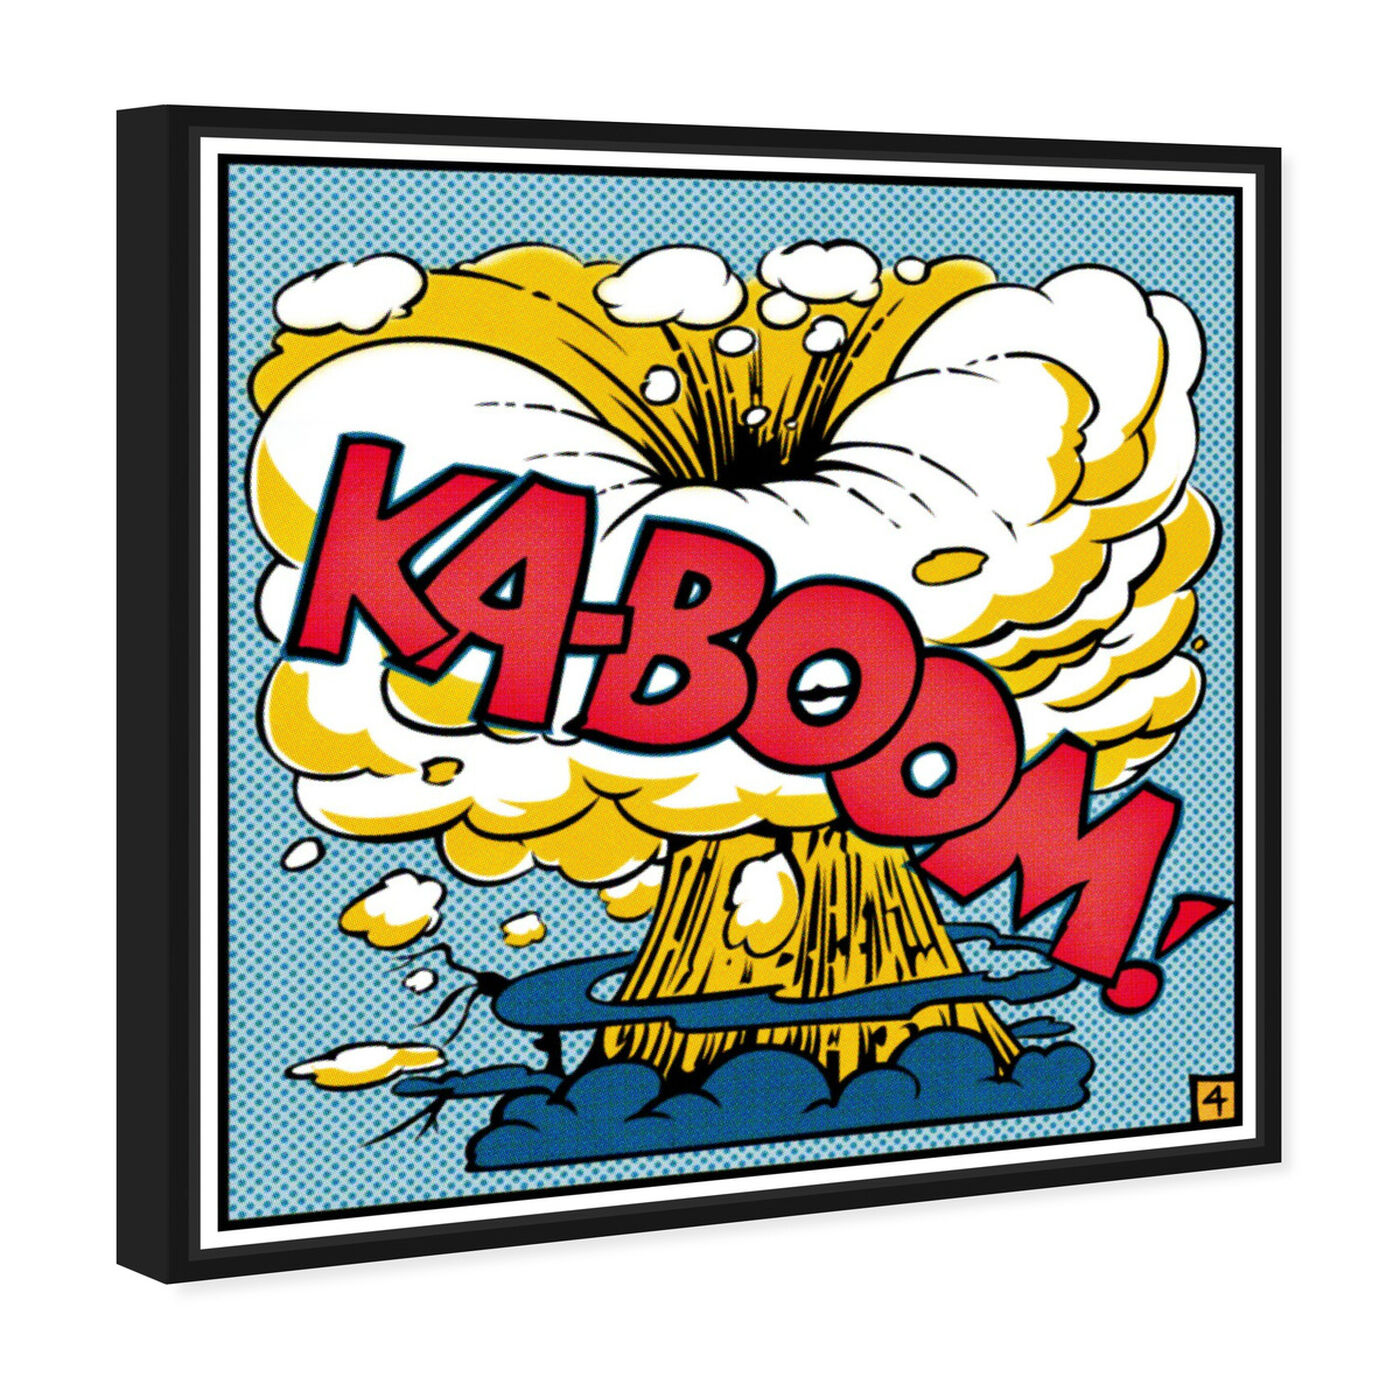 Angled view of Ka-Boom featuring advertising and comics art.